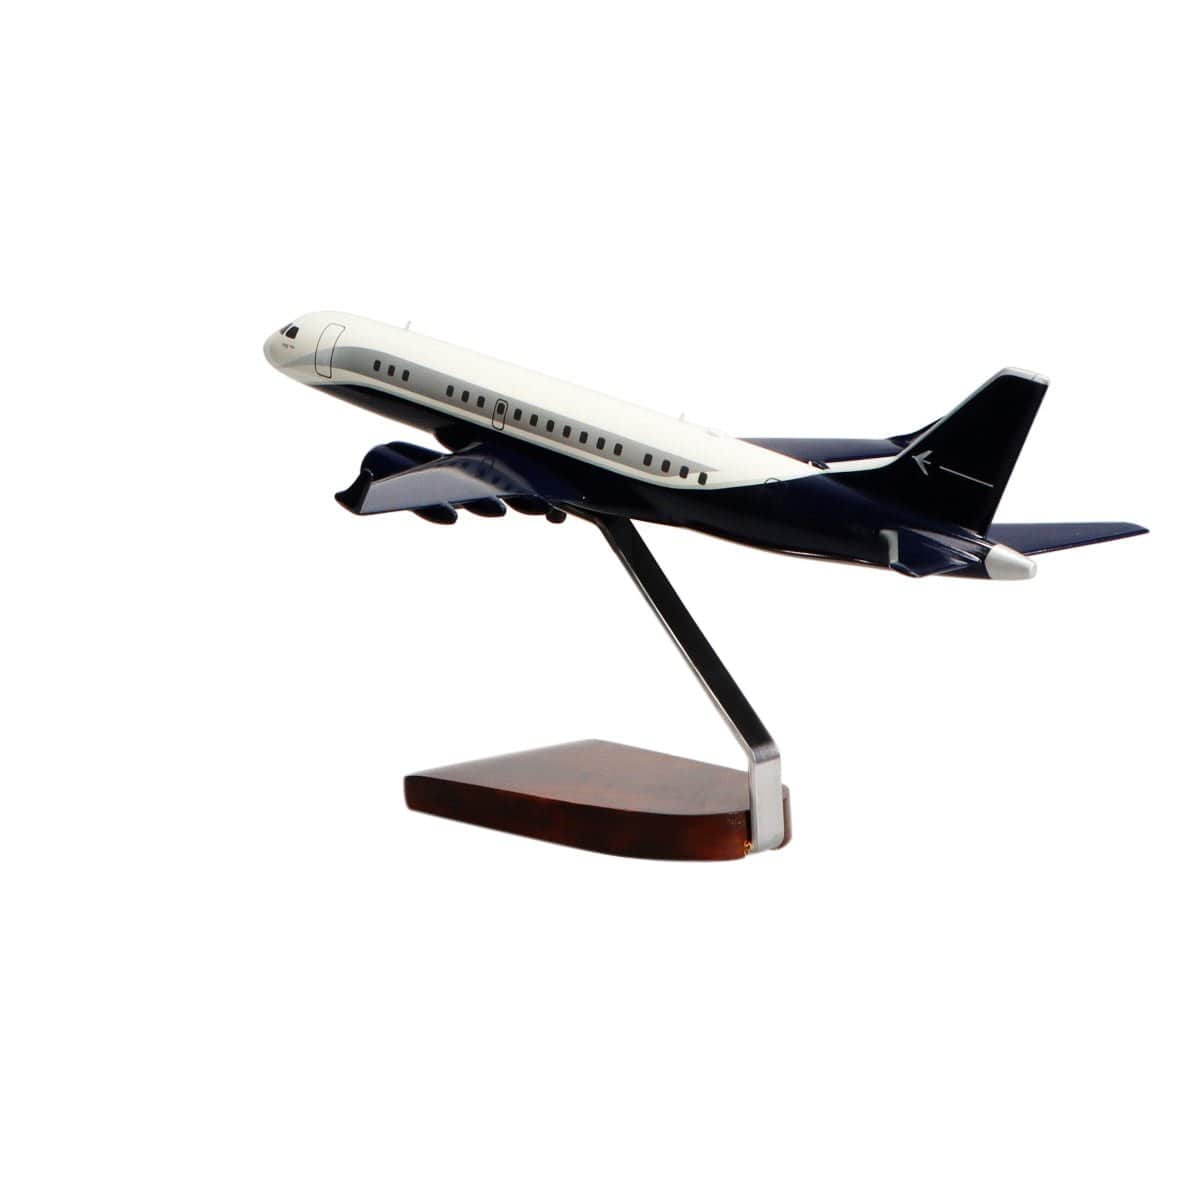 Embraer Lineage 1000 Large Mahogany Model